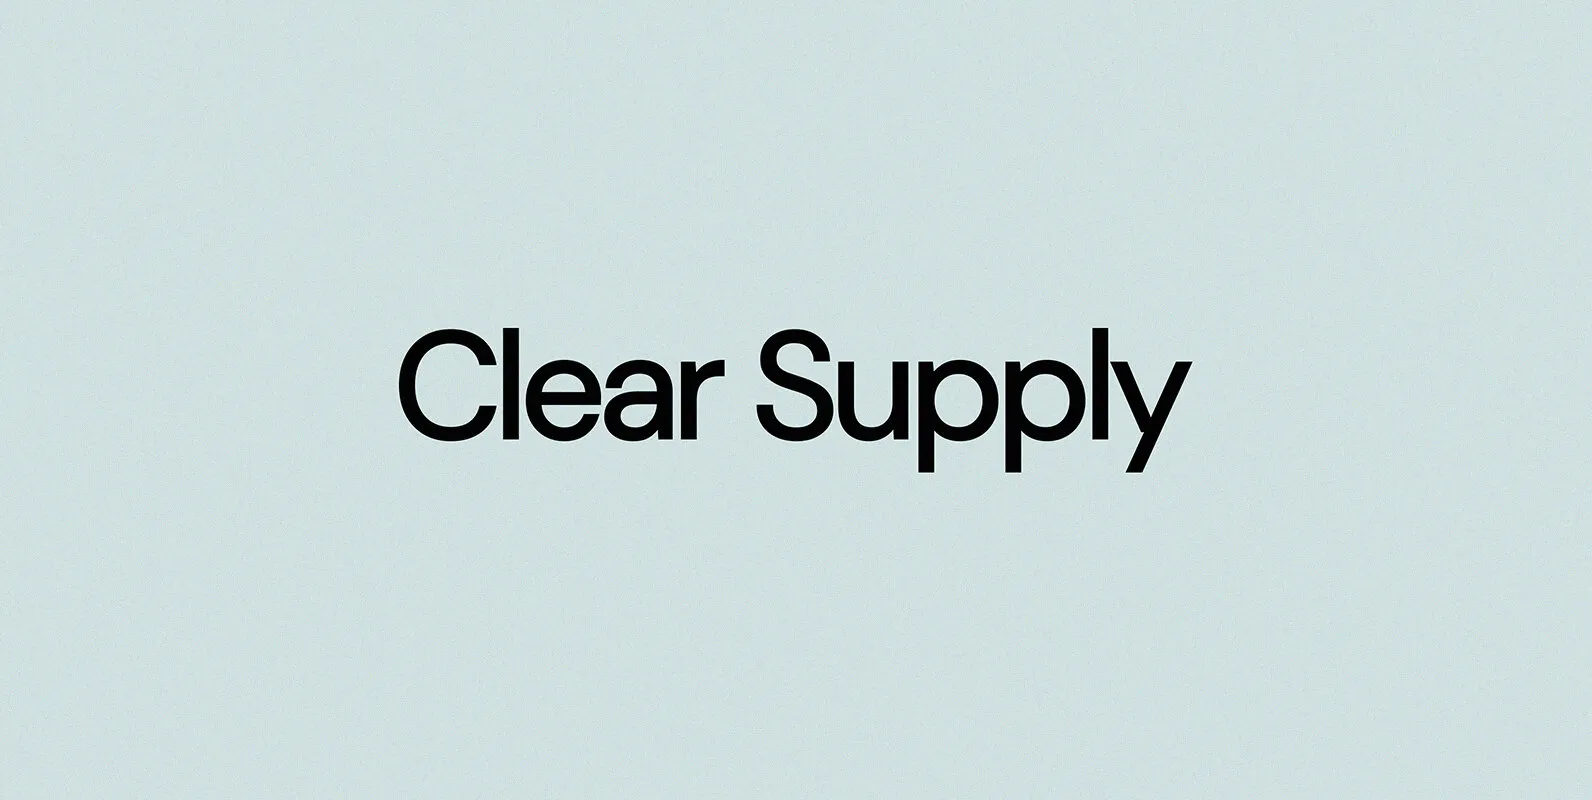 Explore The Stock Graphics of Clear Supply